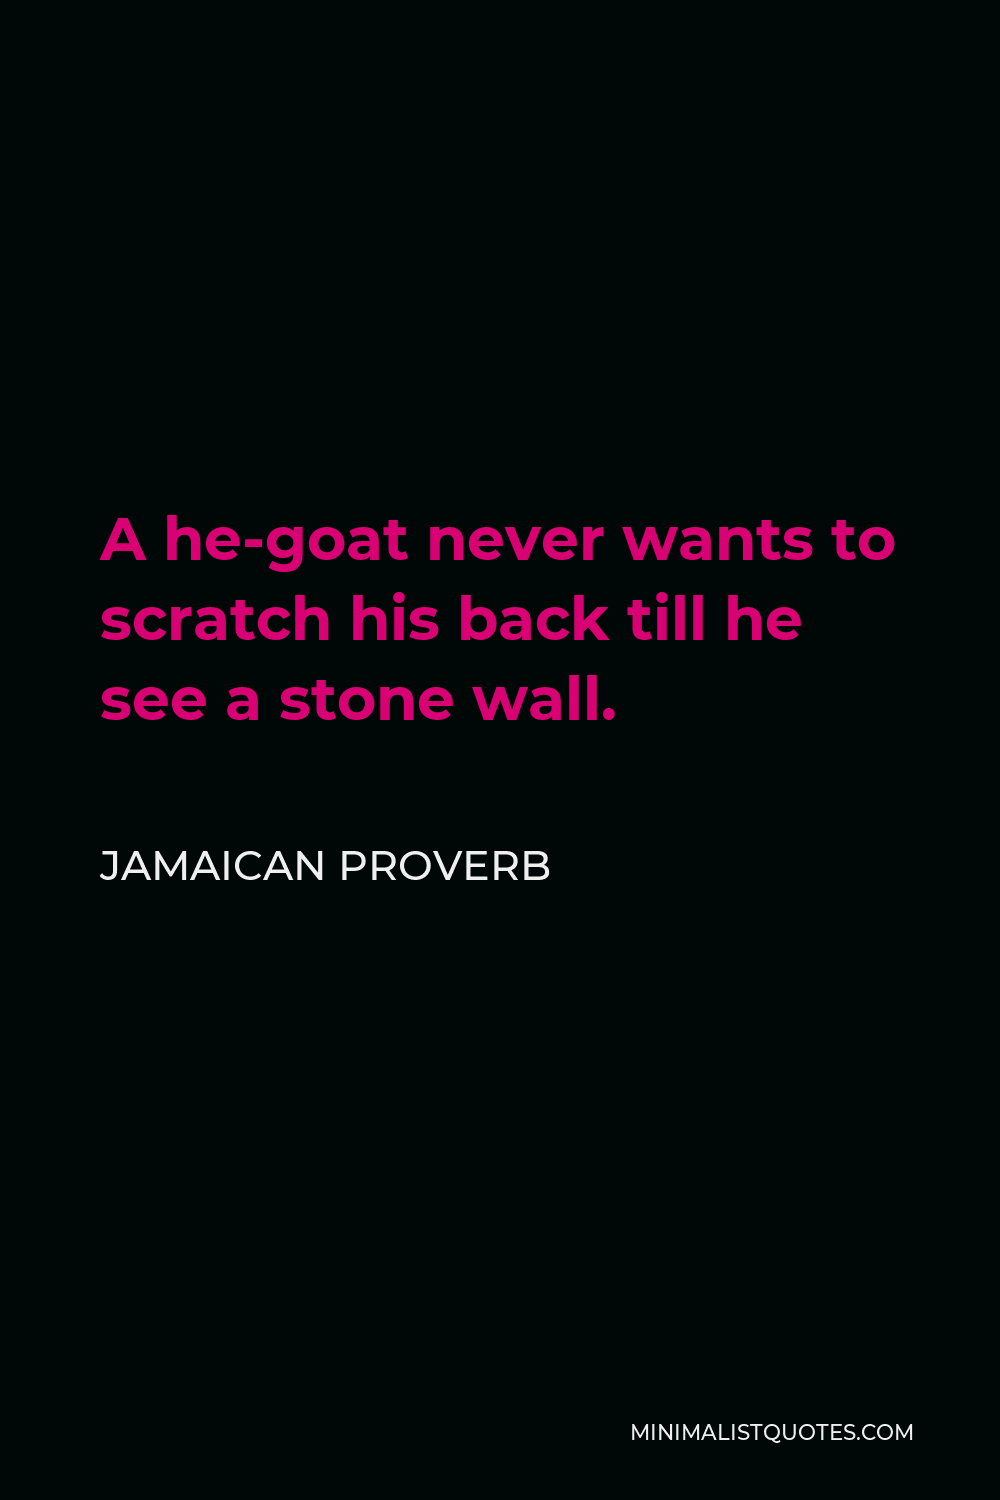 Jamaican Proverb Quote - A he-goat never wants to scratch his back till he see a stone wall.